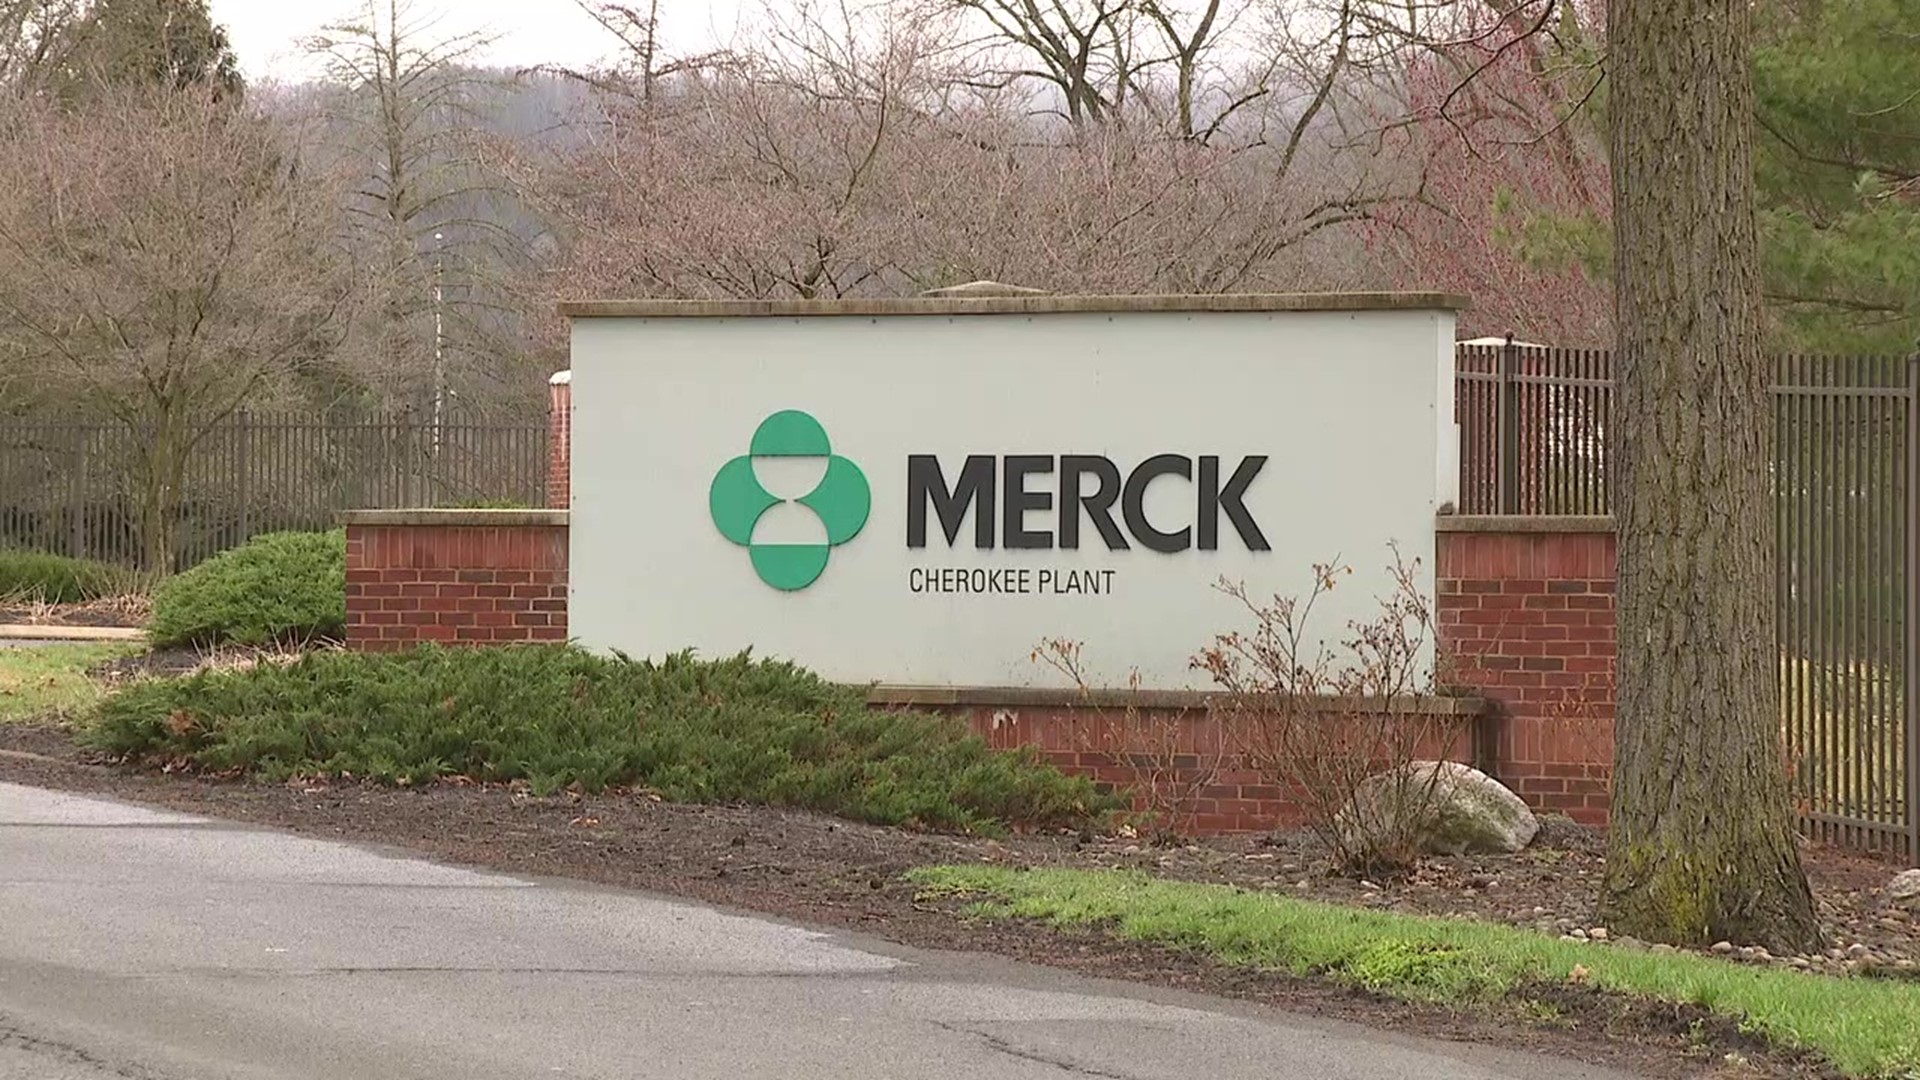 The Merck Cherokee facility in Riverside will be shut down by 2024, according to a release.